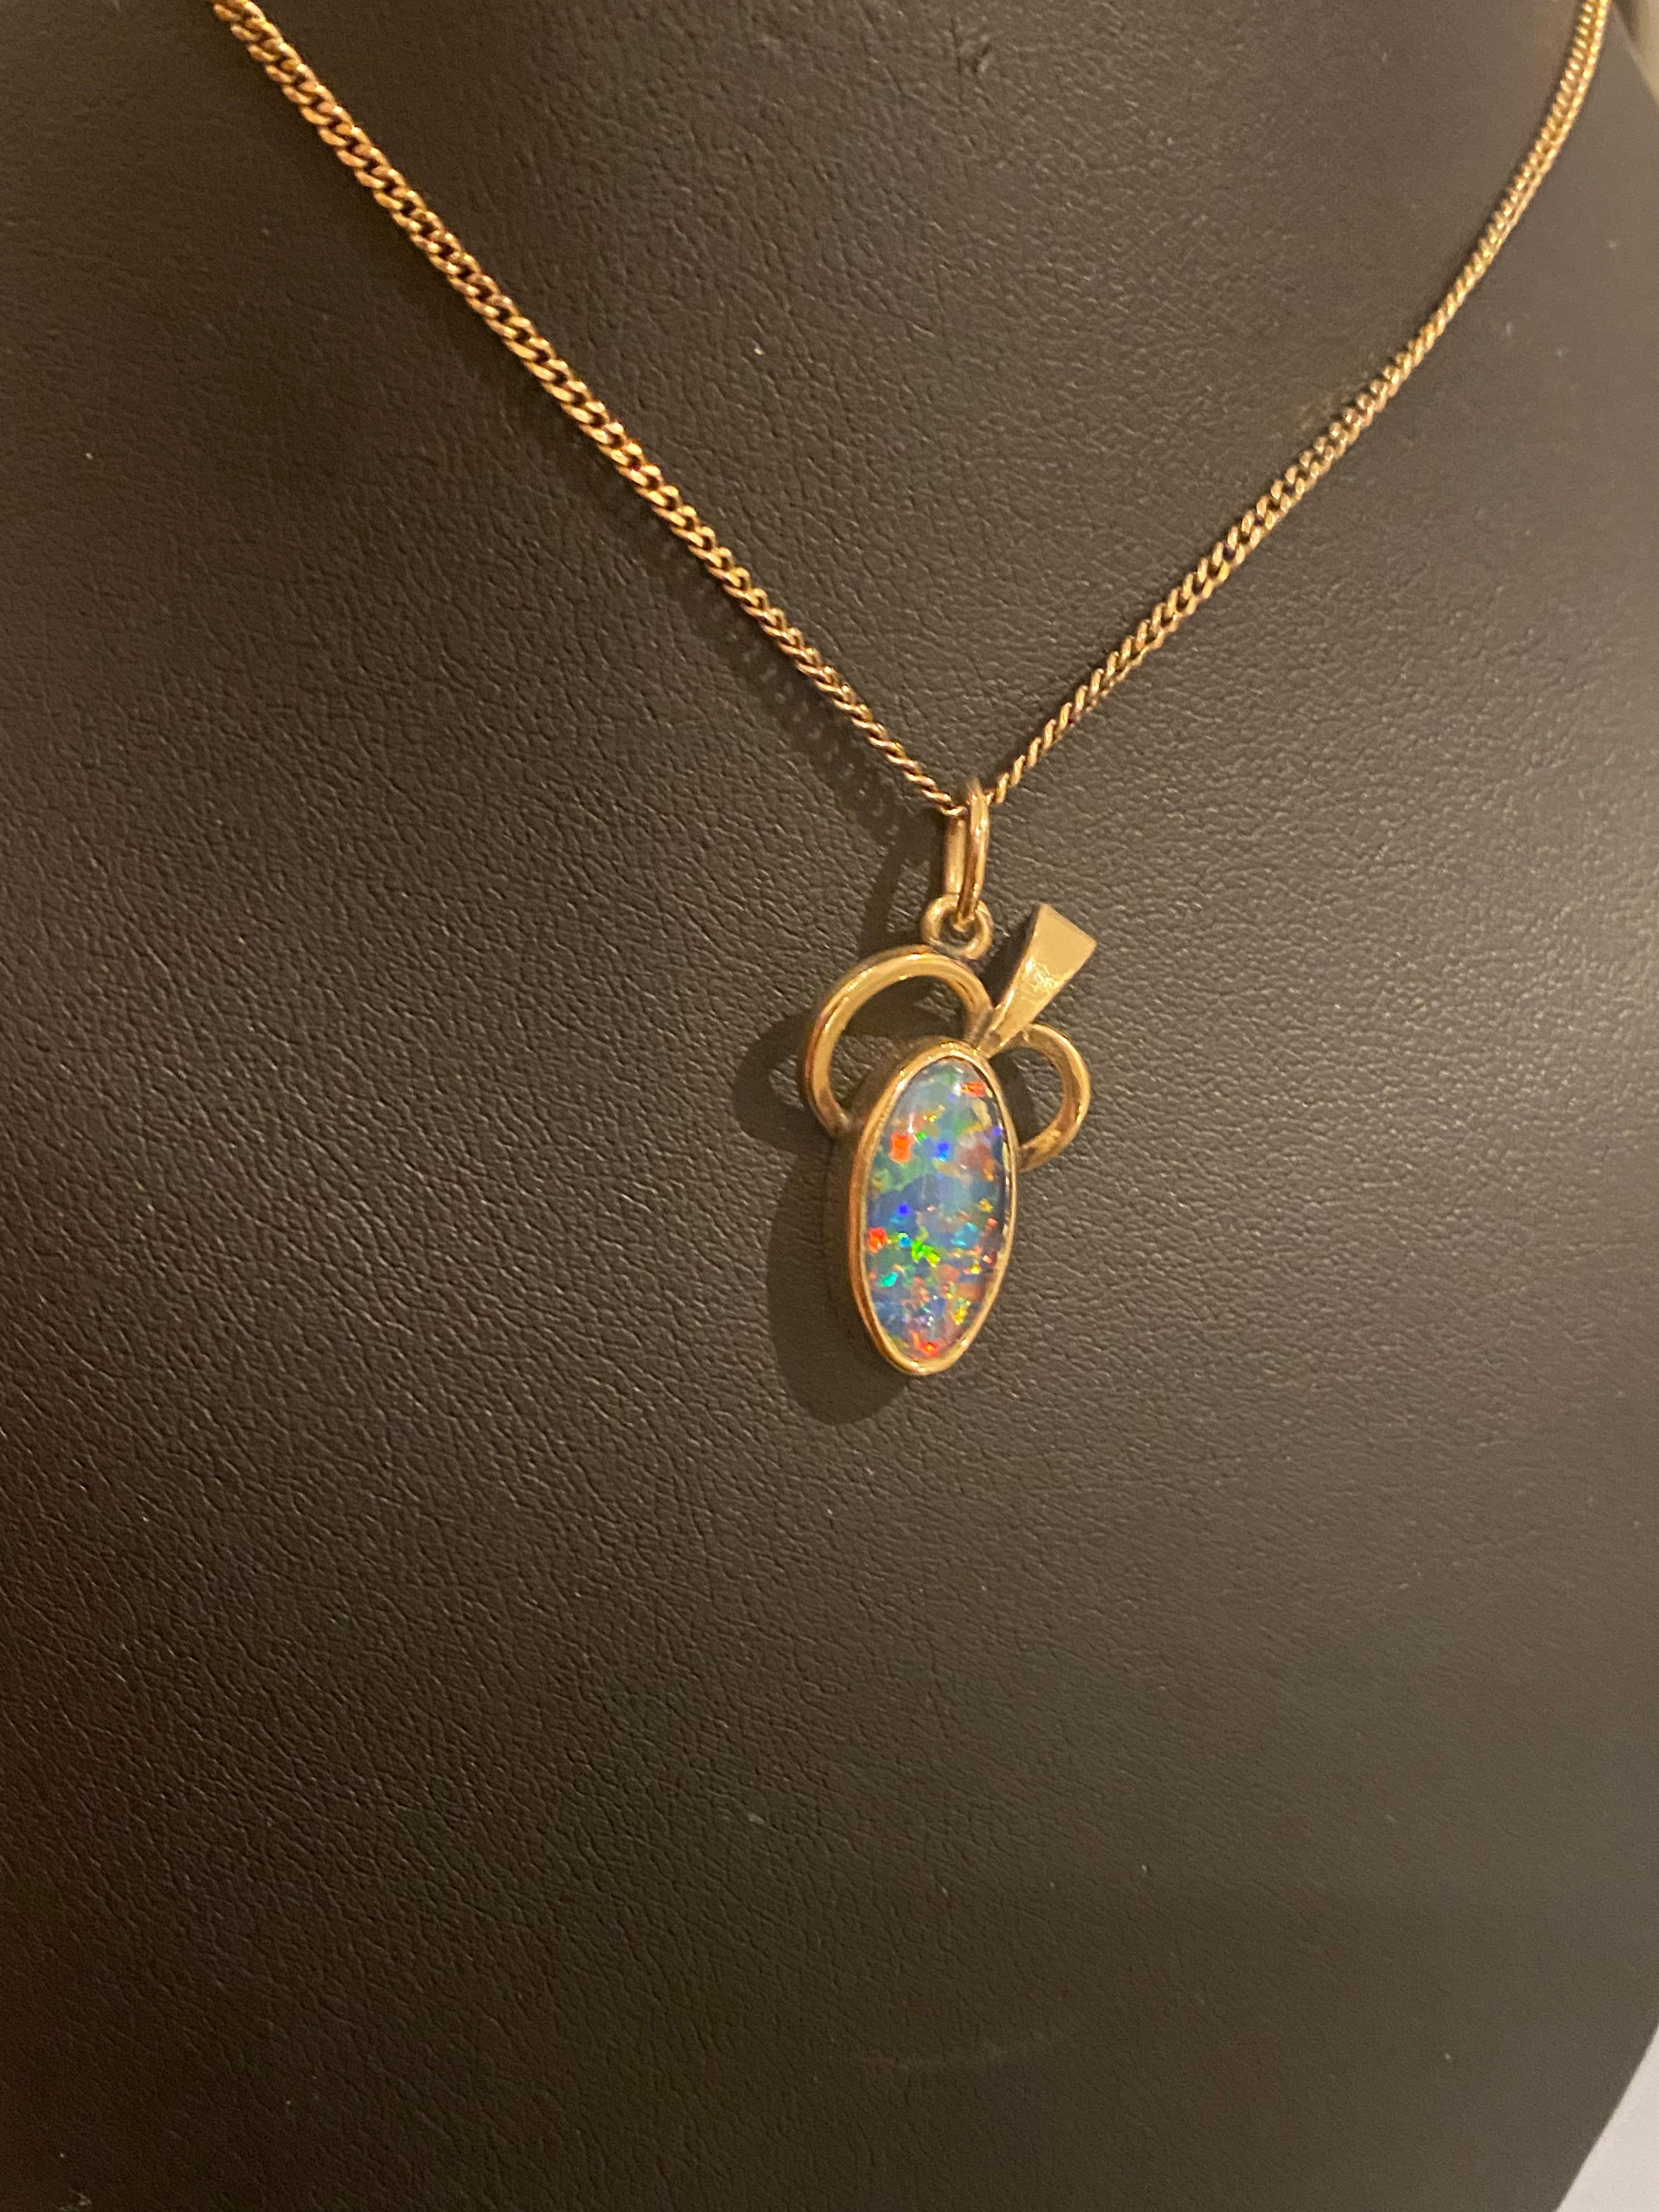 Women's Retro c1960's Australian Oval Opal 9K Yellow Gold Pendant on Matching Gold Chain For Sale